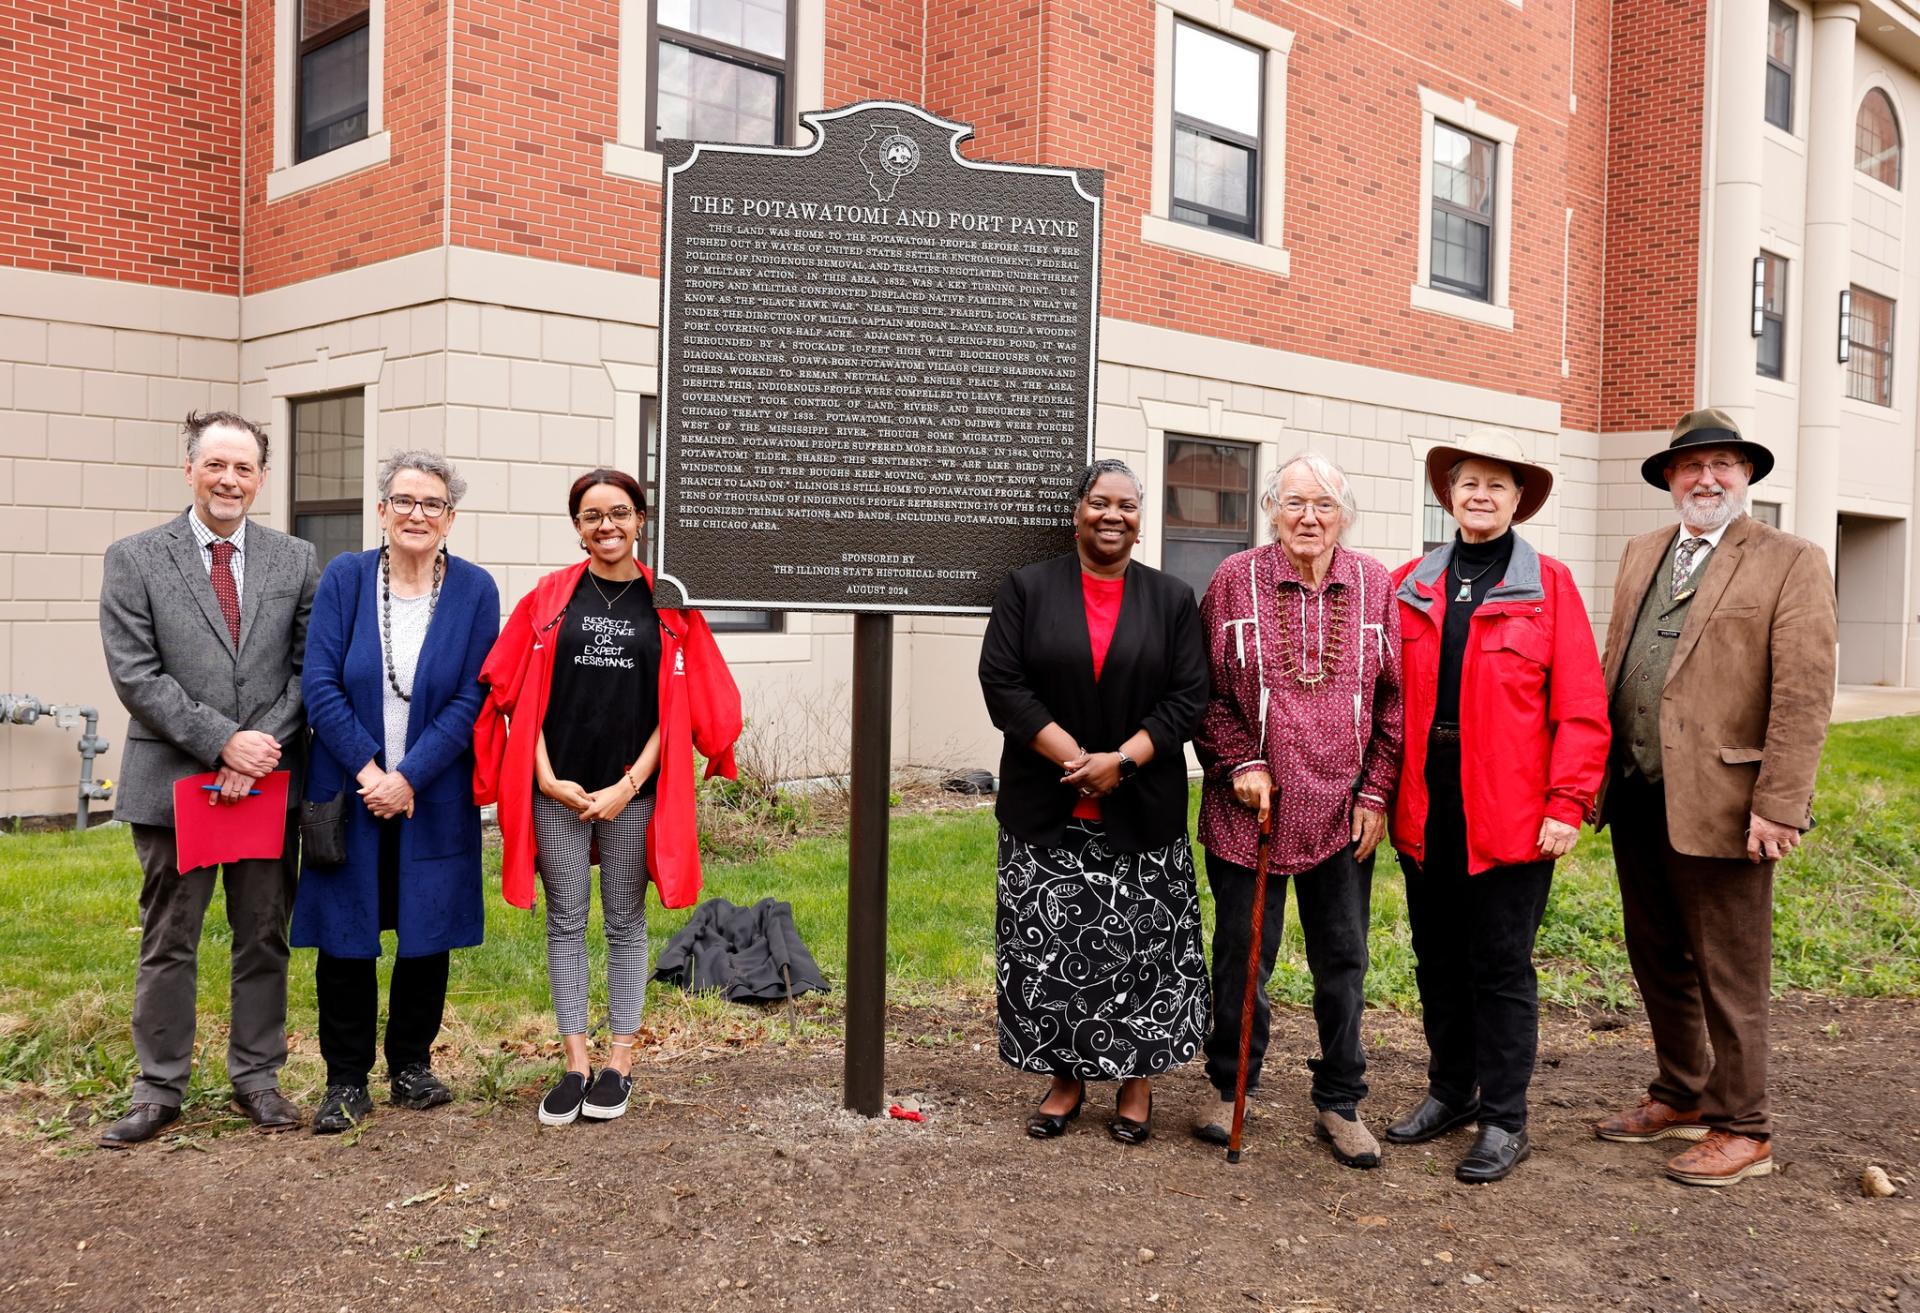 Dignitaries at the new historical marker on campus.